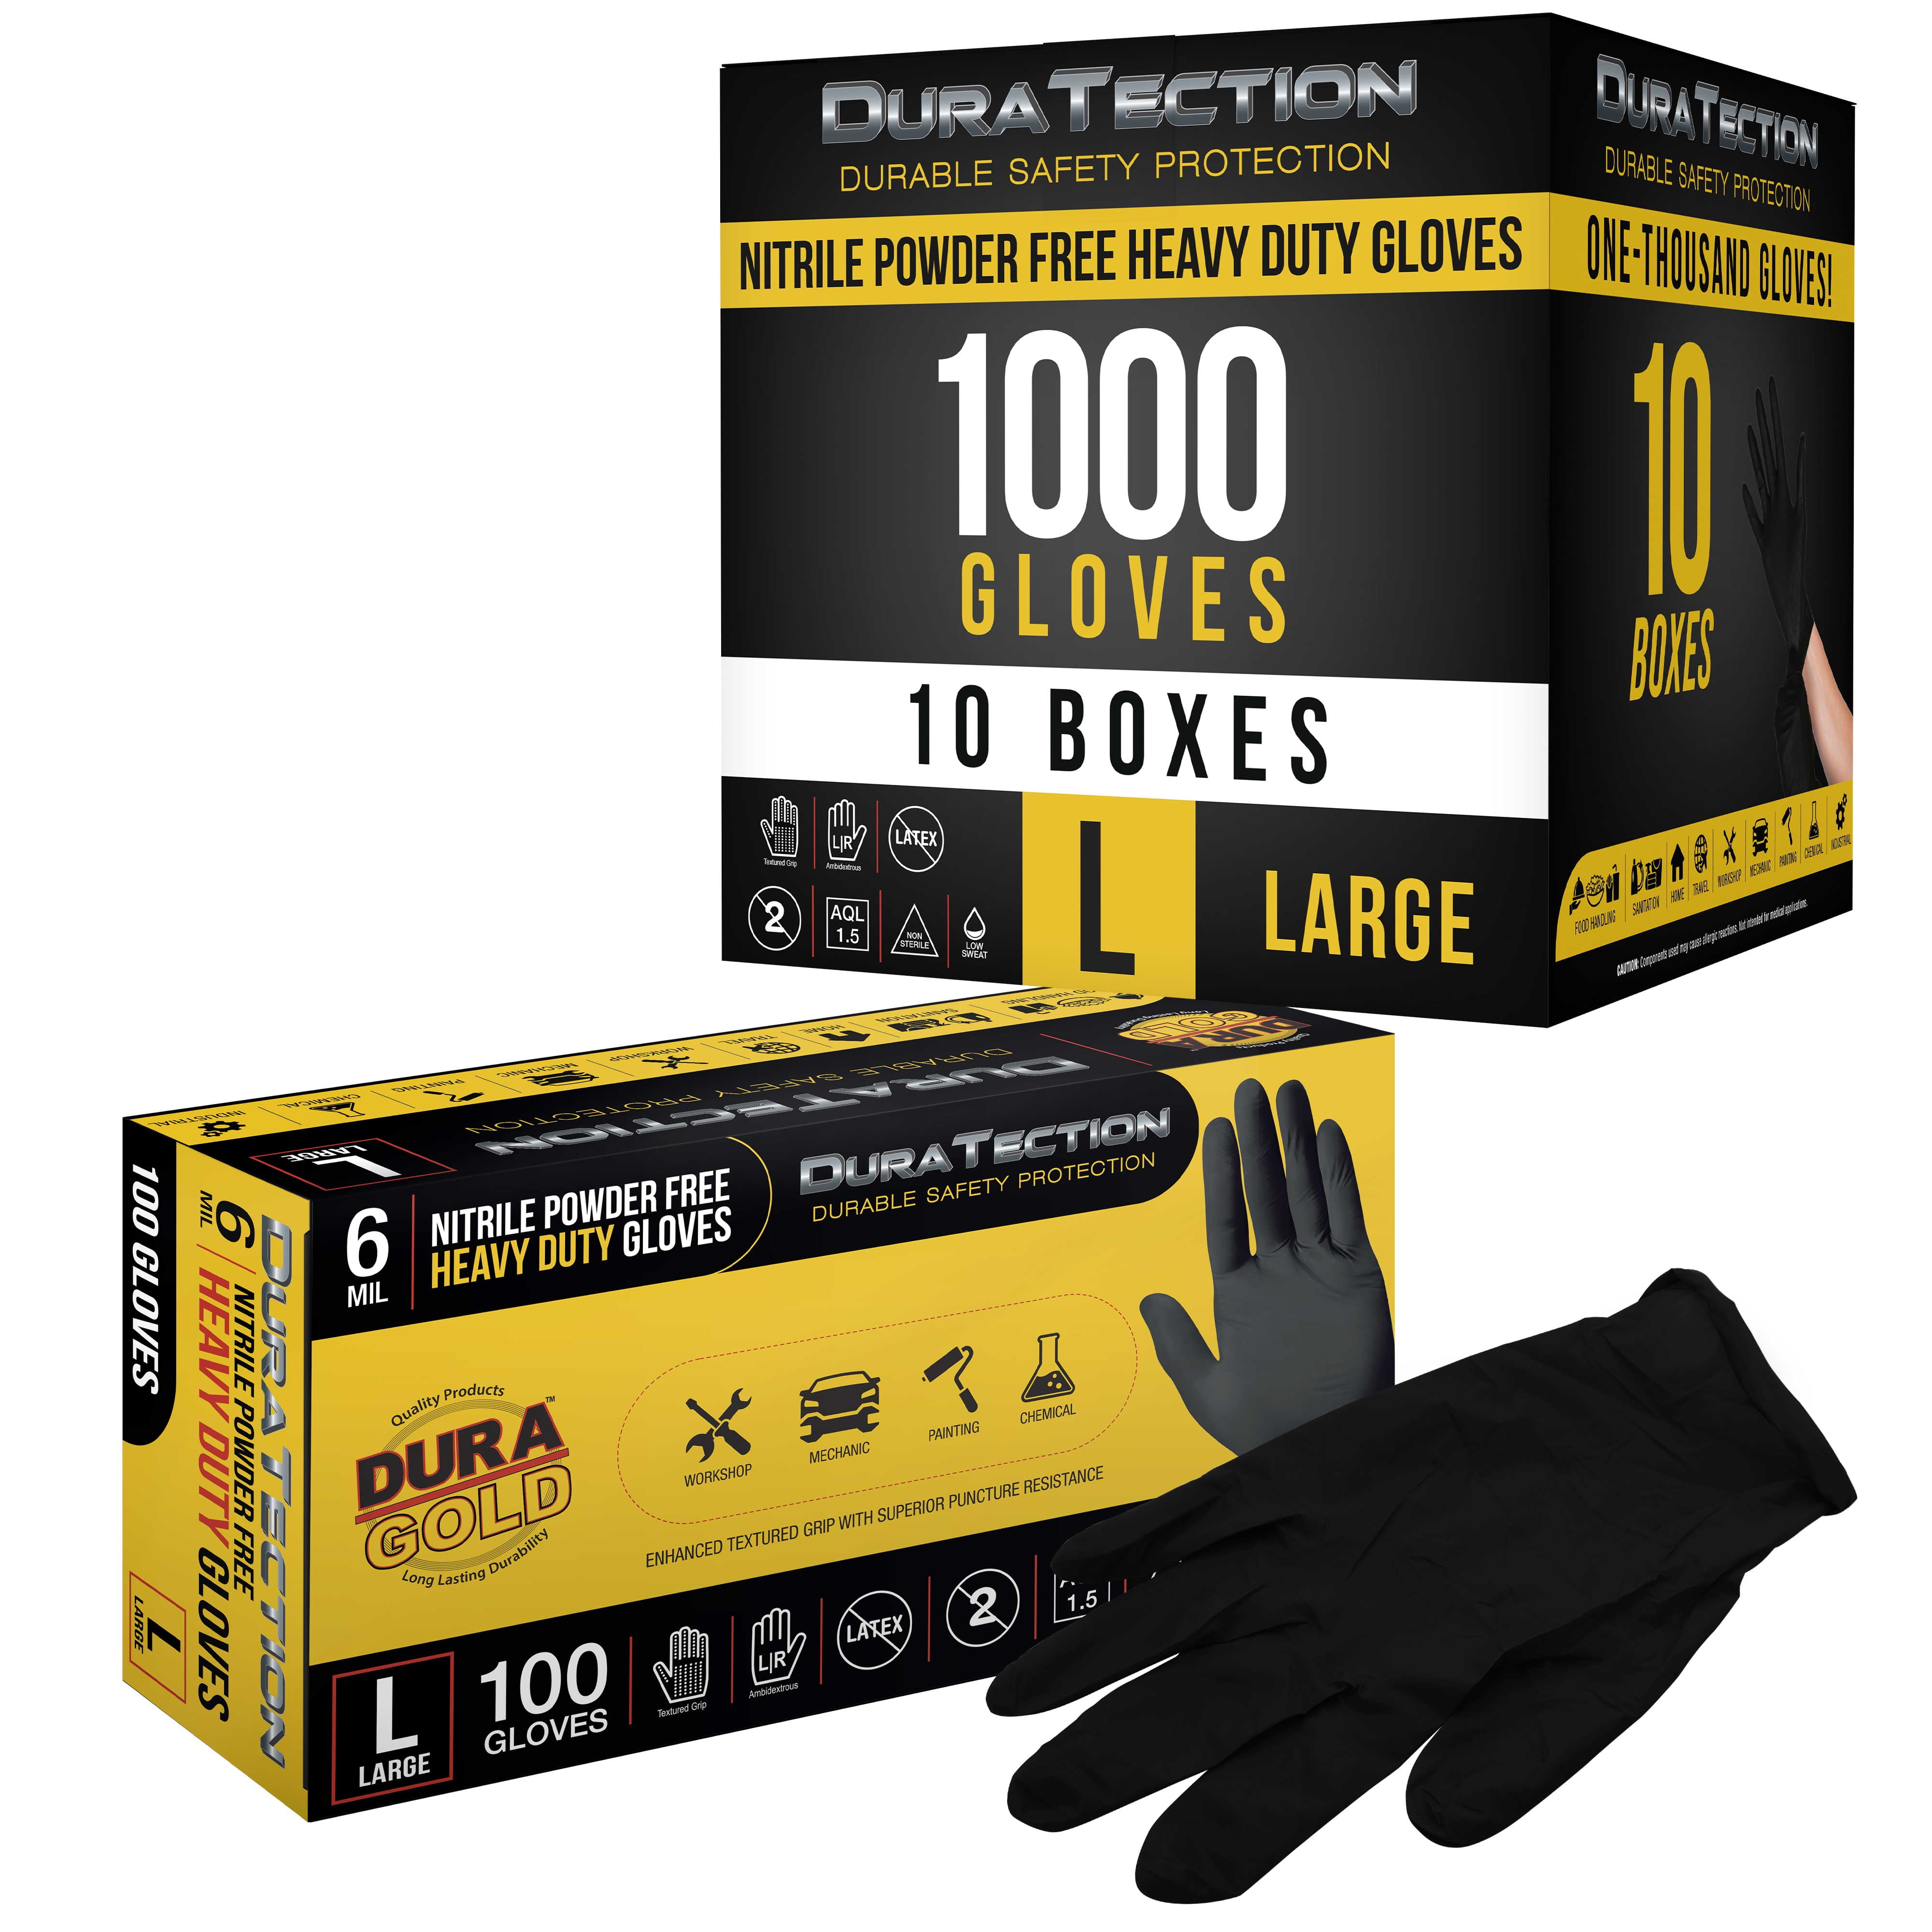 Dura-Gold HD Black Nitrile Disposable Gloves, Box of 100, Size XX-Large, 6  Mil - Latex Free, Powder Free, Textured Grip, Food Safe 